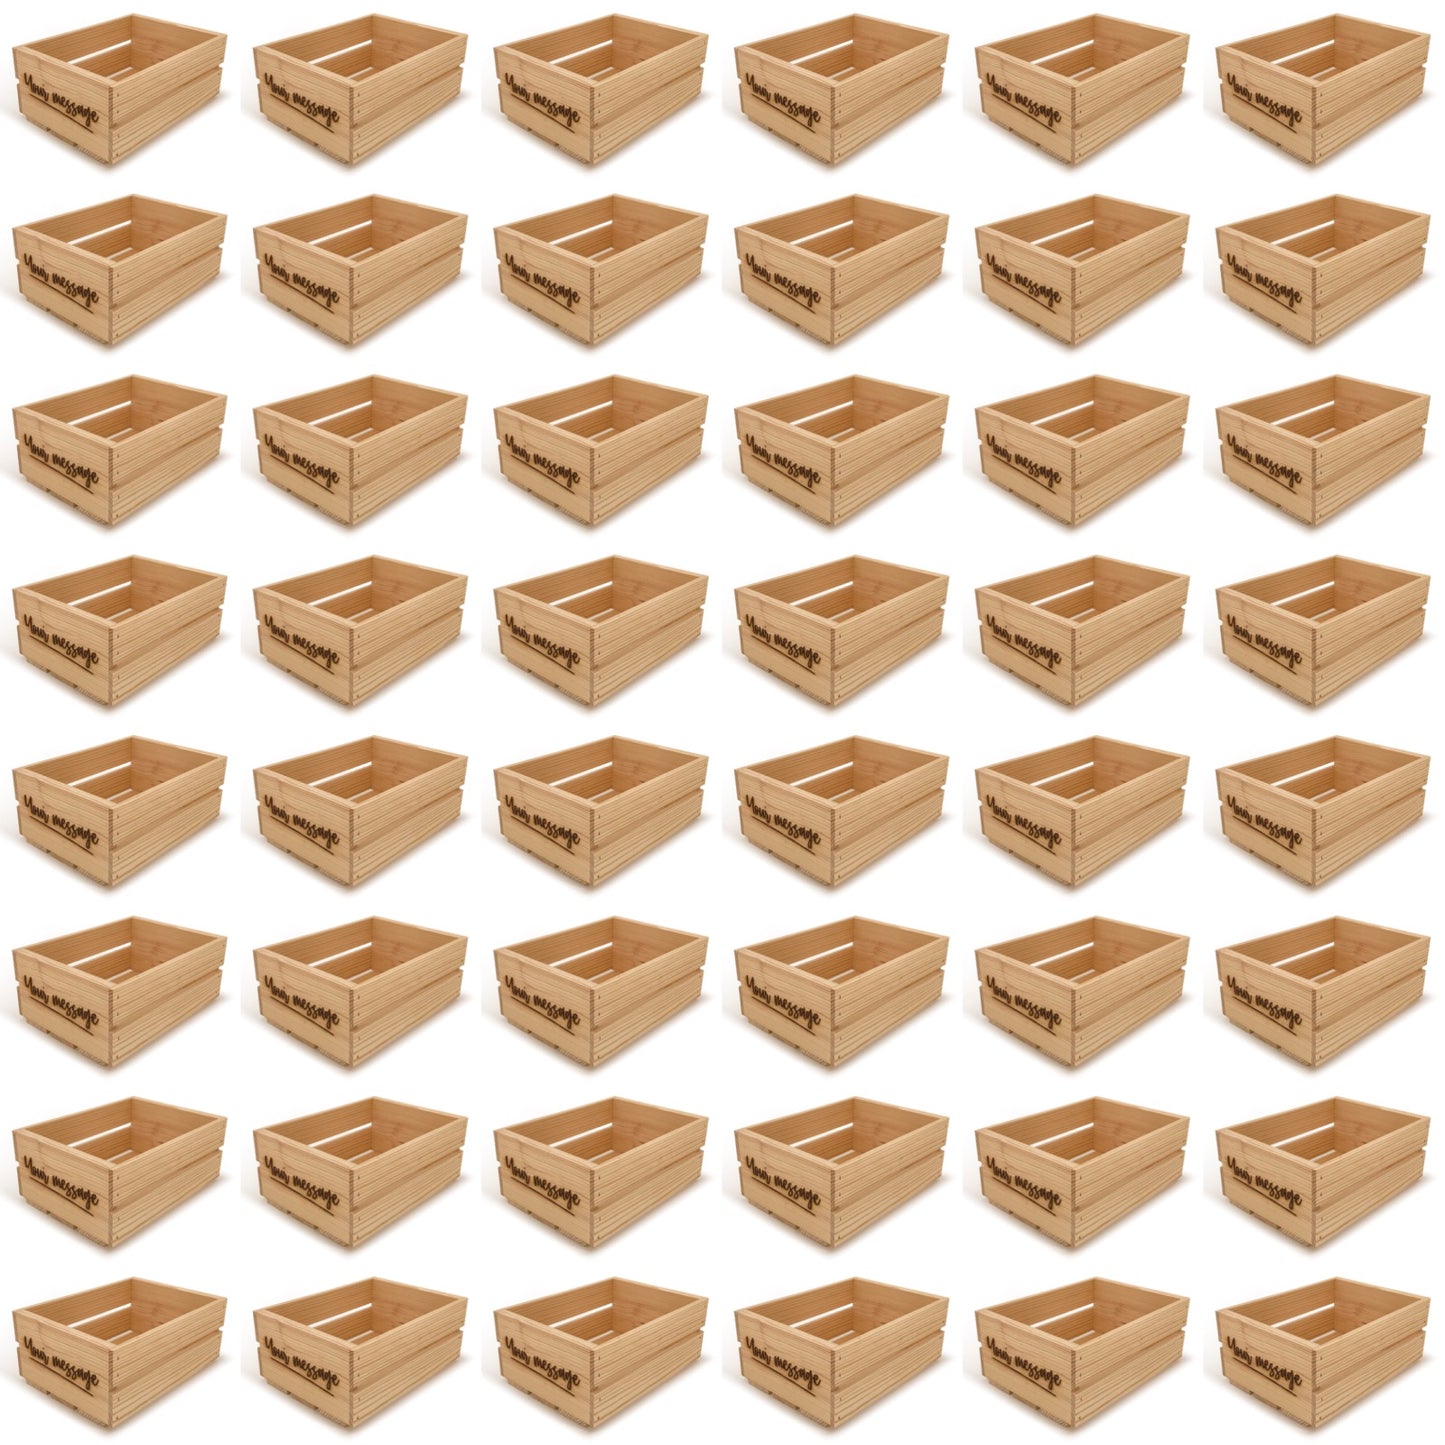 48 Small wooden crates with custom message 12x9x5.25, 6-WS-12-9-5.25-ST-NW-NL, 12-WS-12-9-5.25-ST-NW-NL, 24-WS-12-9-5.25-ST-NW-NL, 48-WS-12-9-5.25-ST-NW-NL, 96-WS-12-9-5.25-ST-NW-NL